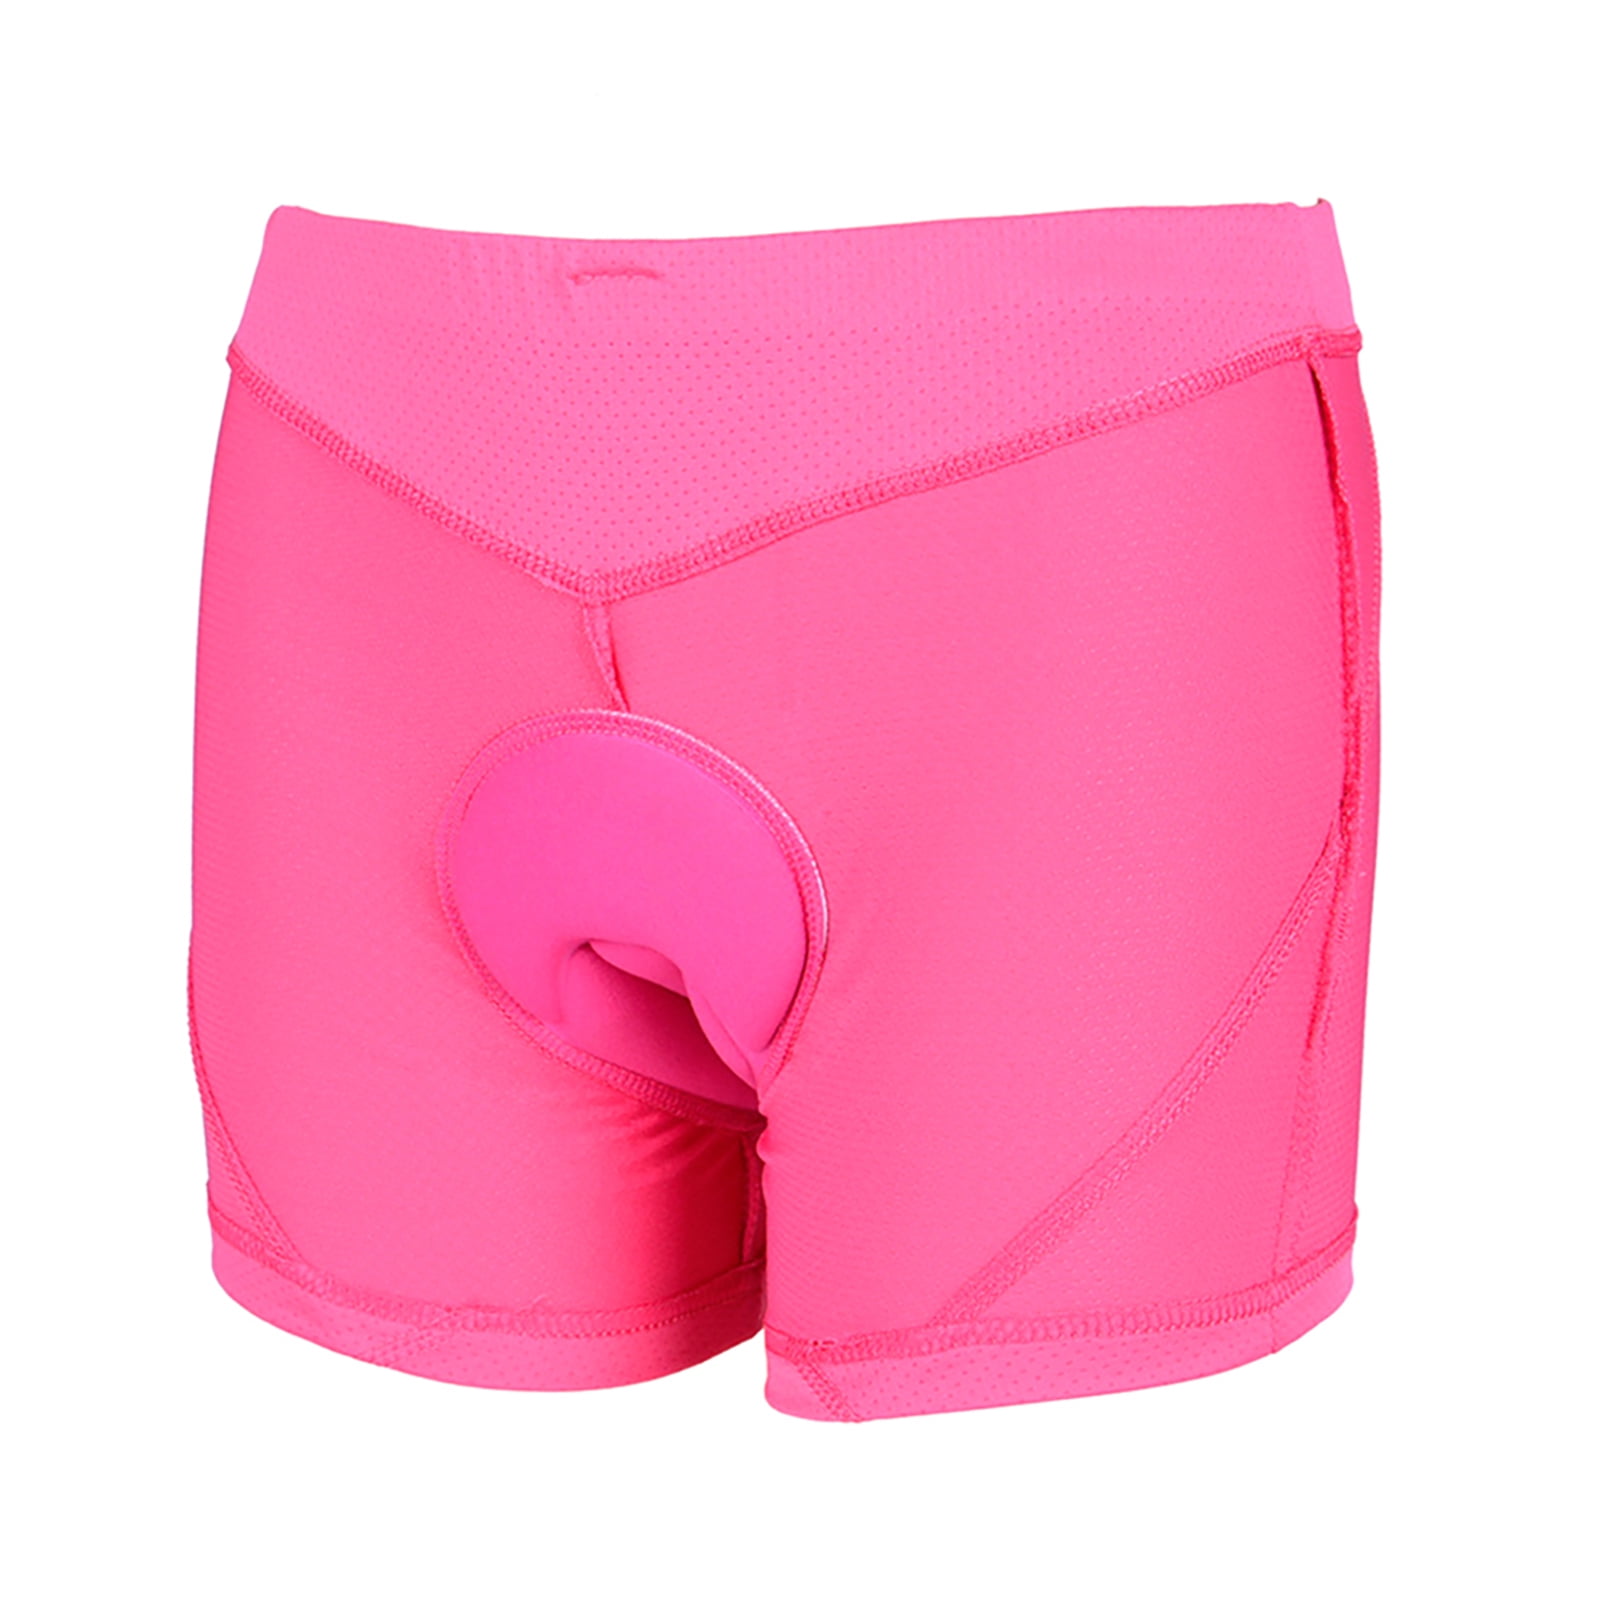 Details about   Women Cycling Underwear,3D Gel Padded Bicycle MTB Liner Shorts,Elastic,Quick-Dry